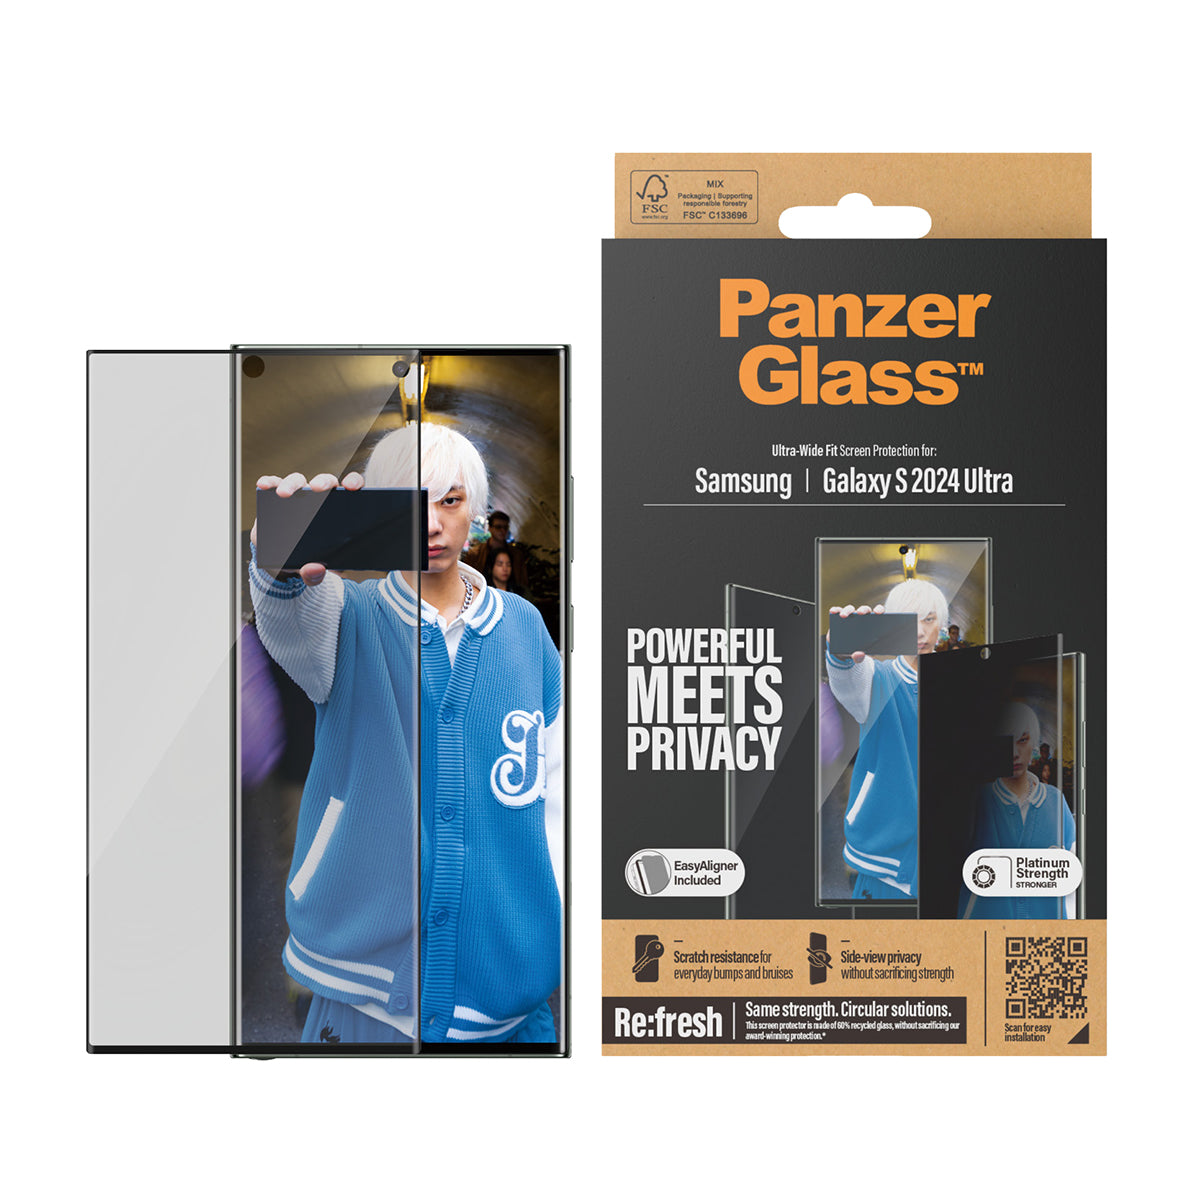 PanzerGlass Ultra-Wide Fit with EasyAligner Privacy Screen Protector for Samsung Galaxy S24 Ultra